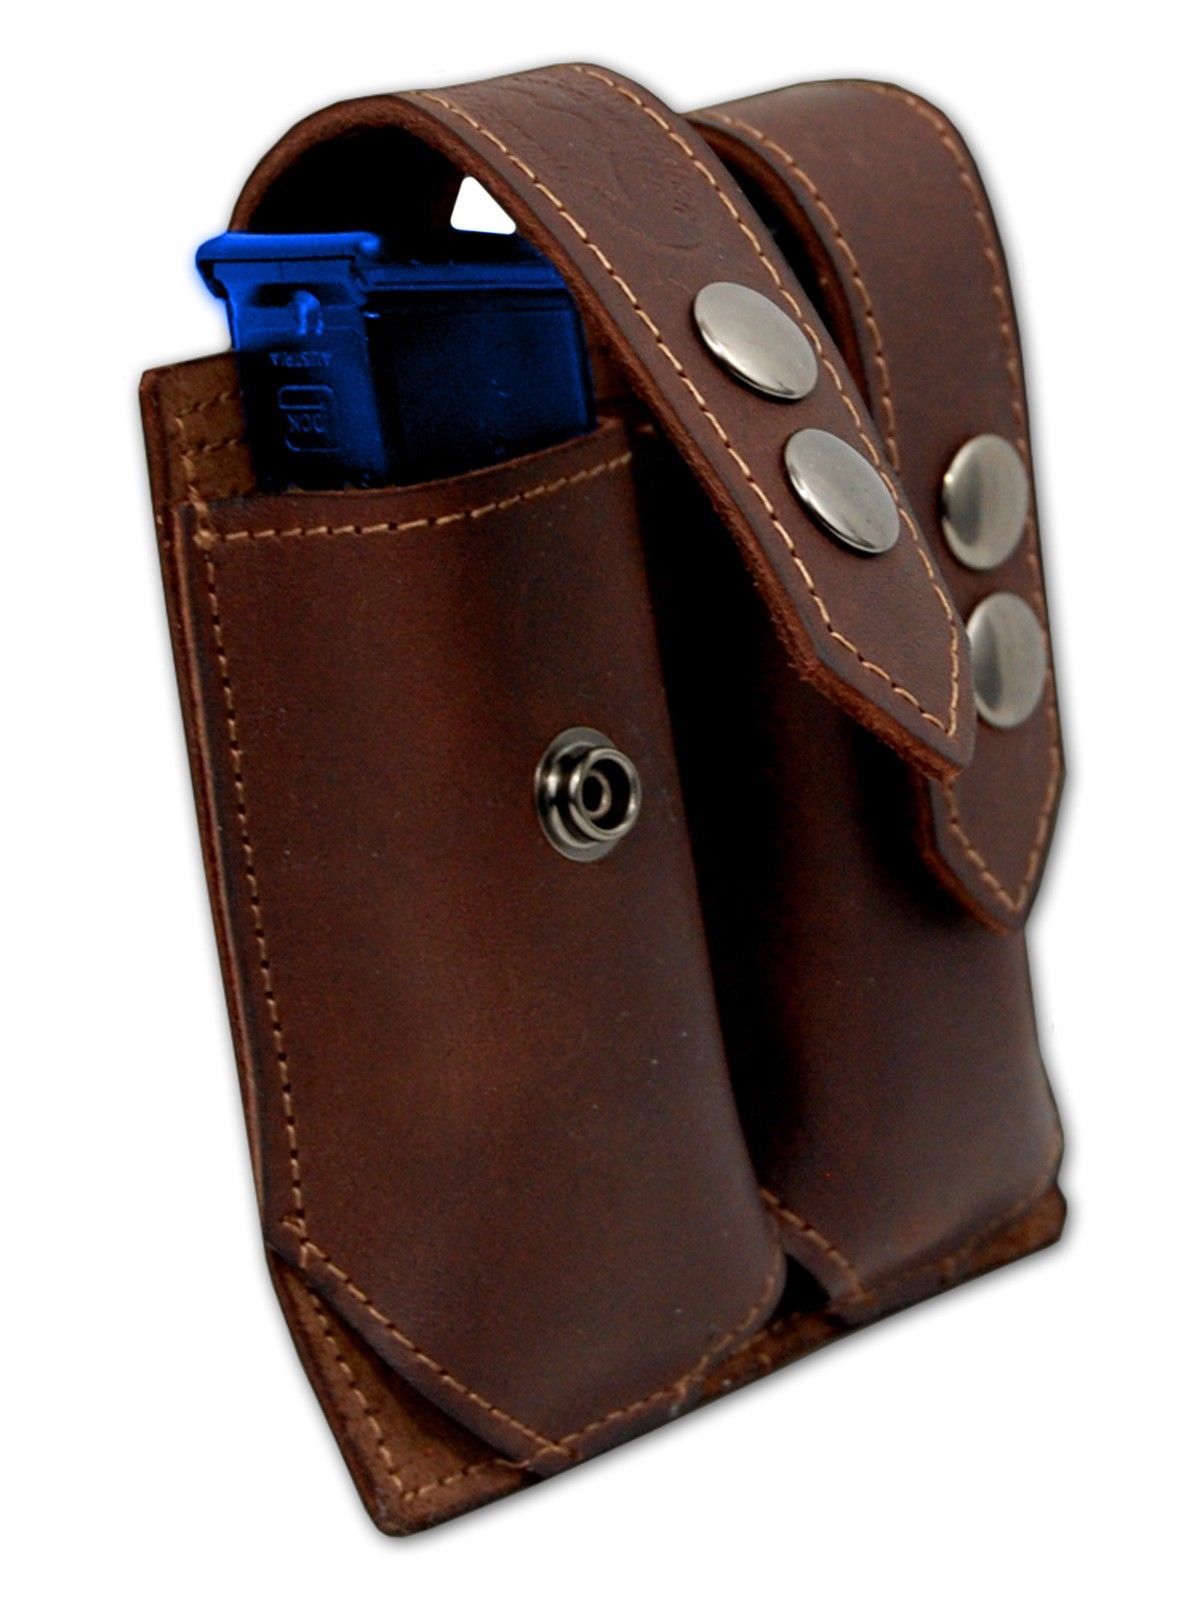 NEW Barsony Brown Leather Double Magazine Pouch Smith & Wesson Full ...